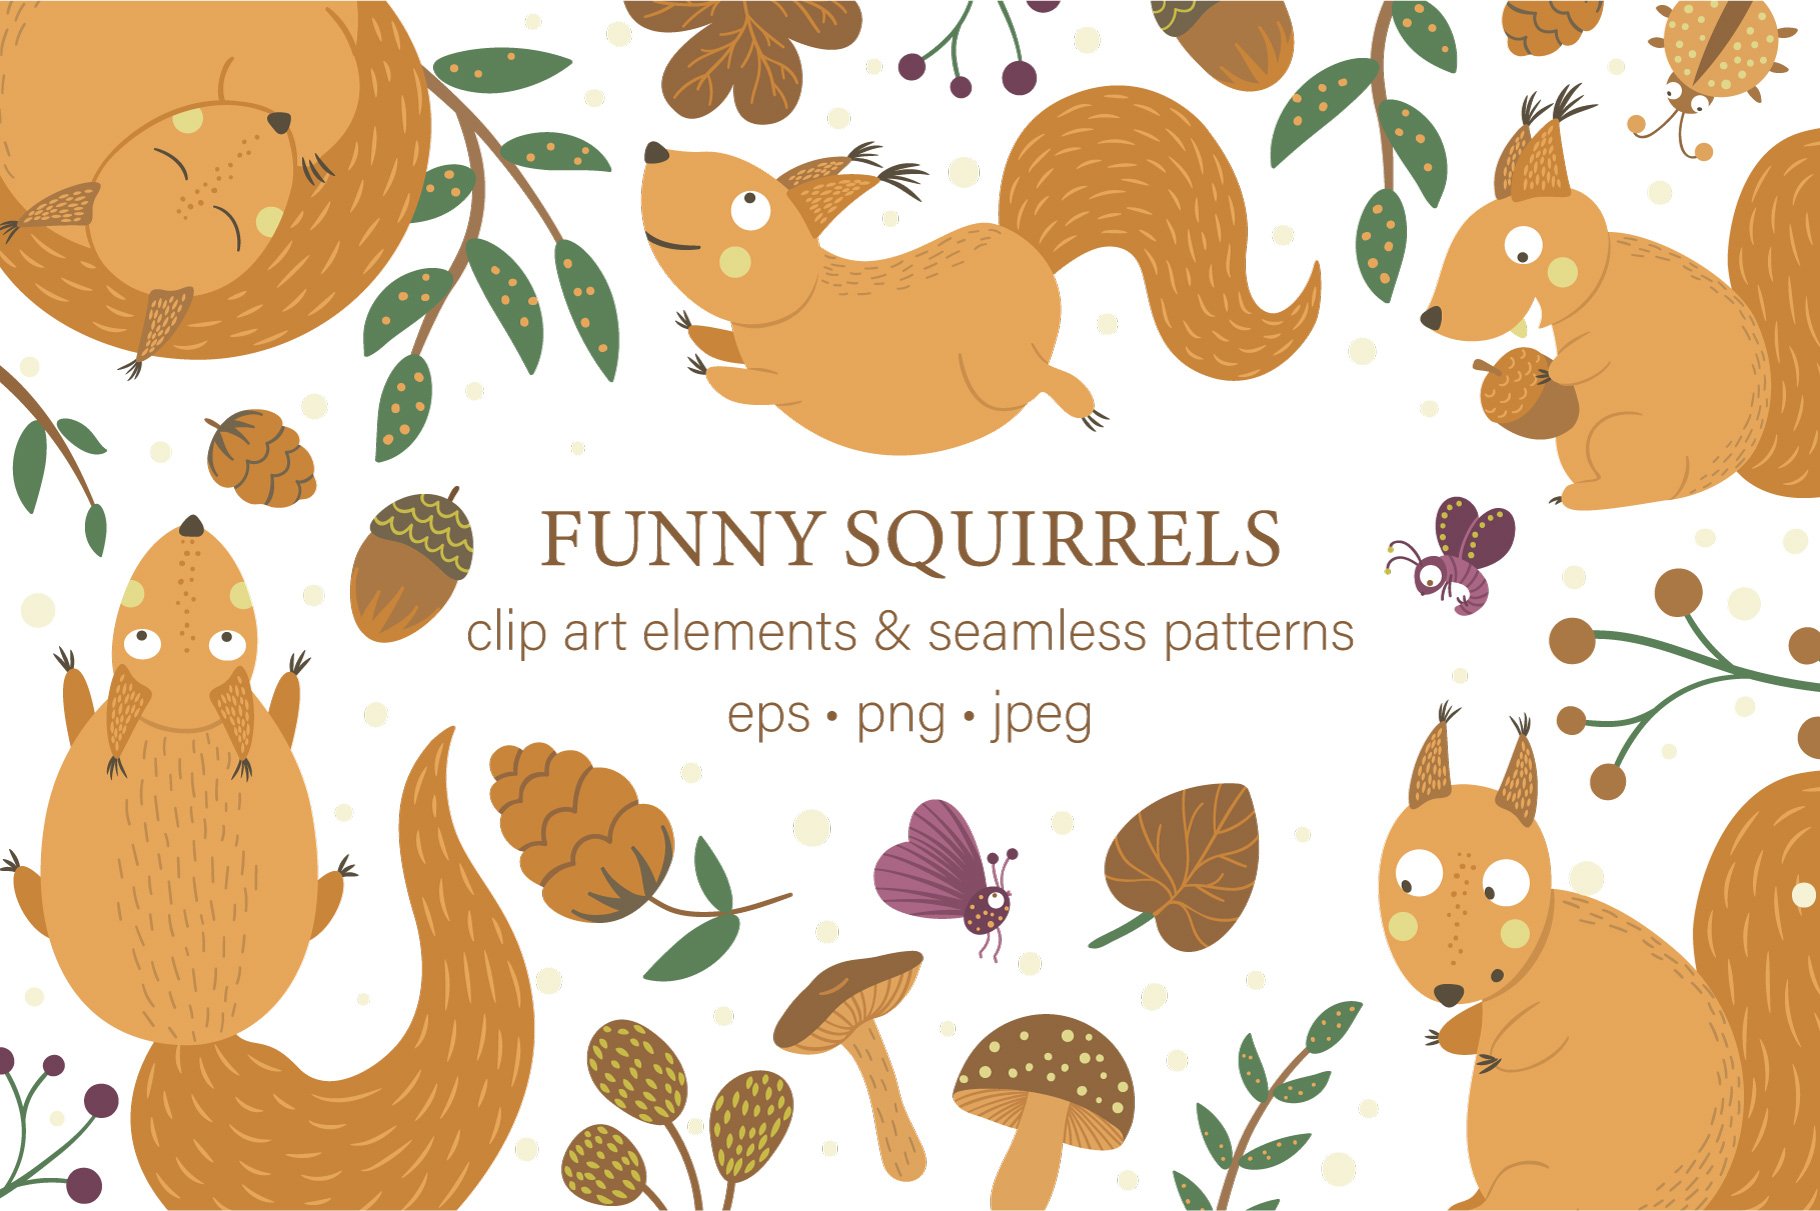 Funny Squirrels cover image.